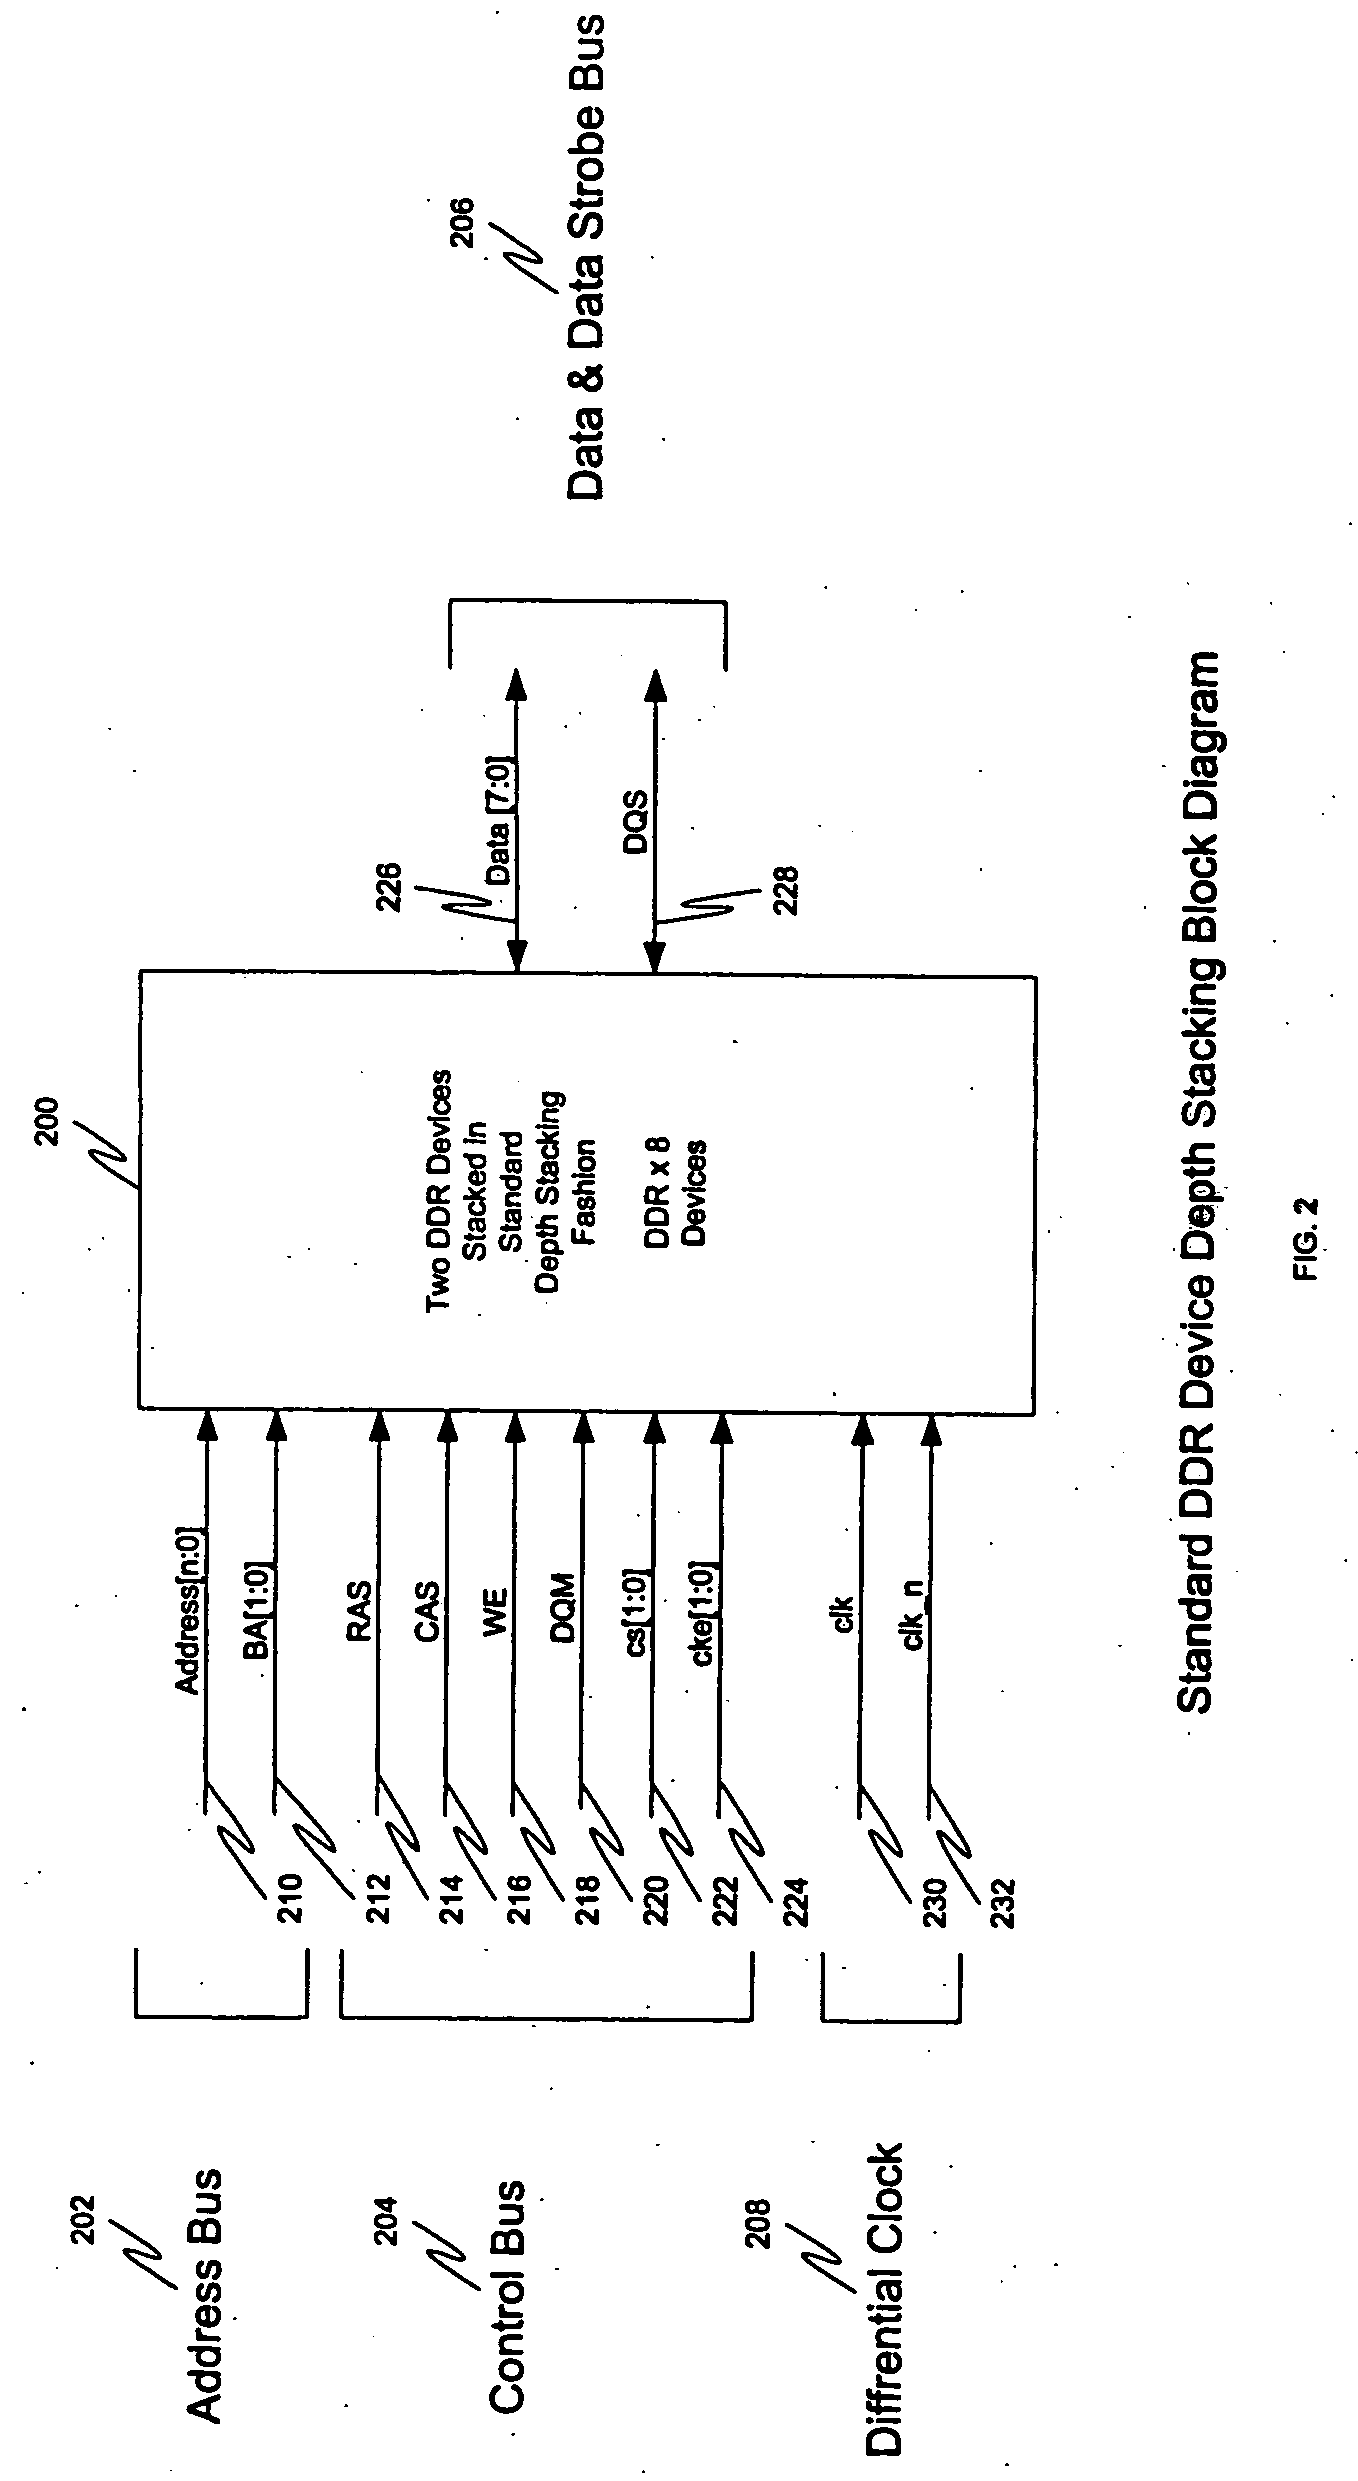 Transparent four rank memory module for standard two rank sub-systems